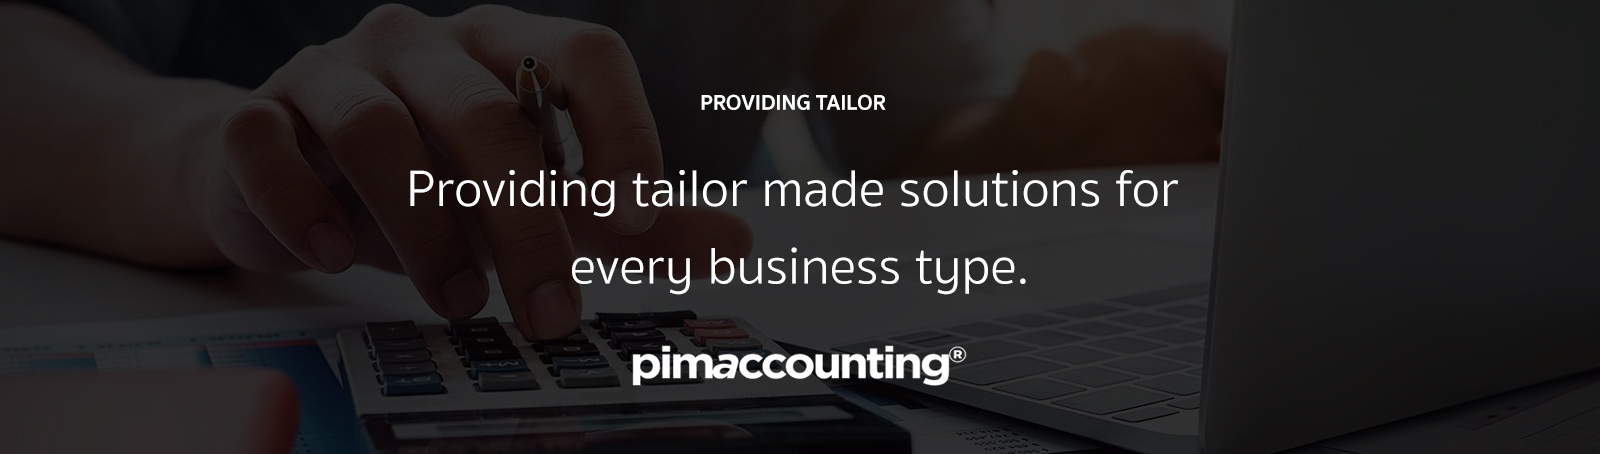 Providing tailor made solutions for every business type.